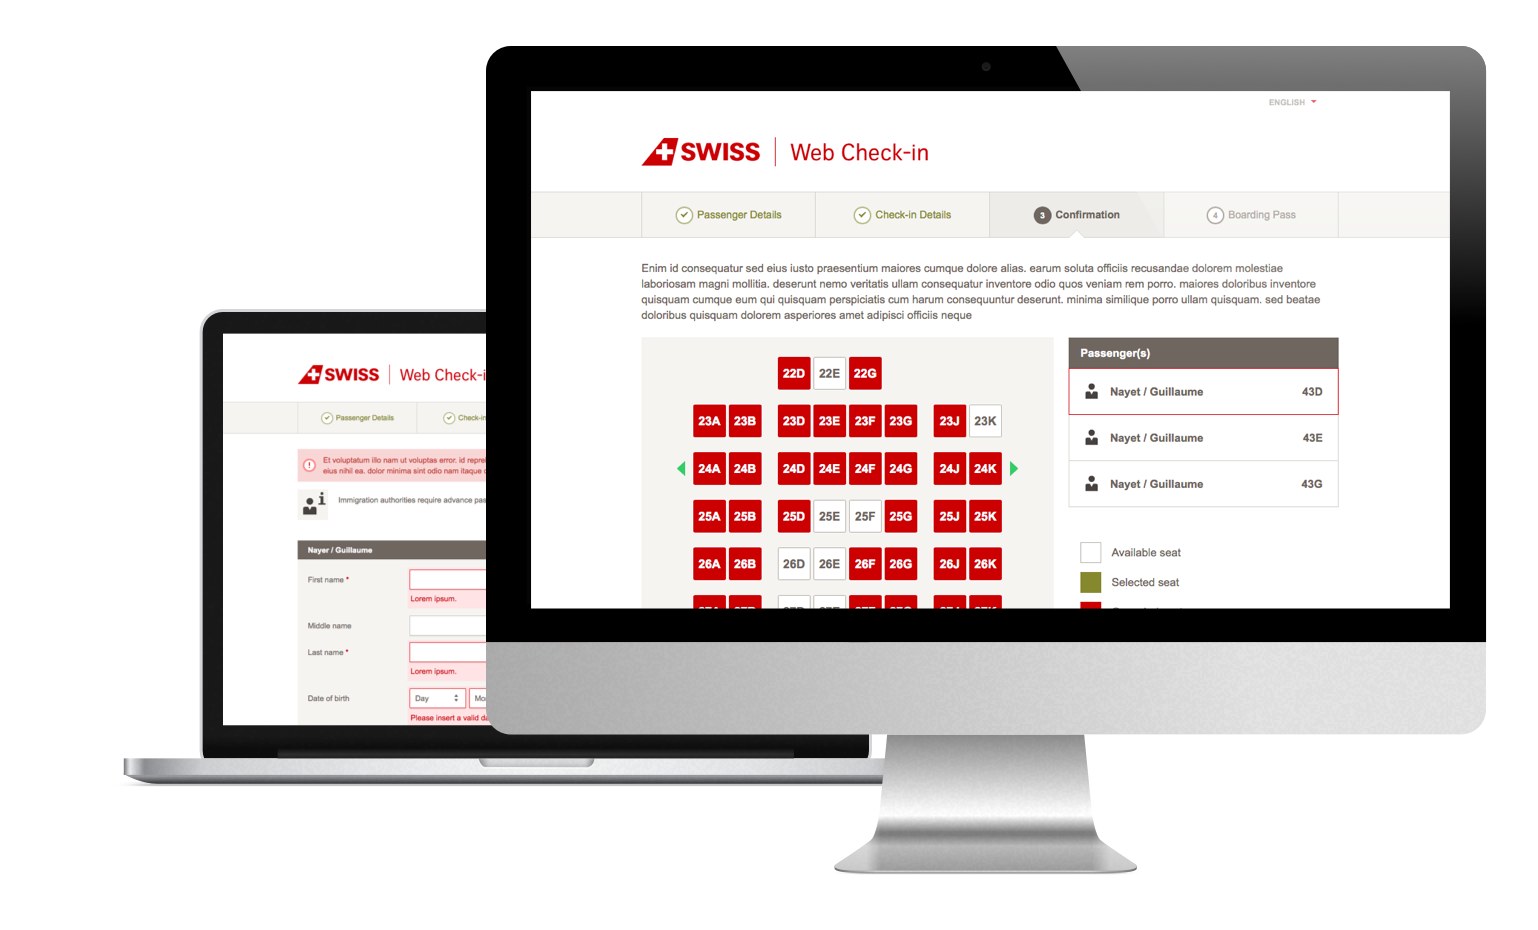 Screenshots of the Swiss.com Web Check-in website on different devices showcasing the responsive design